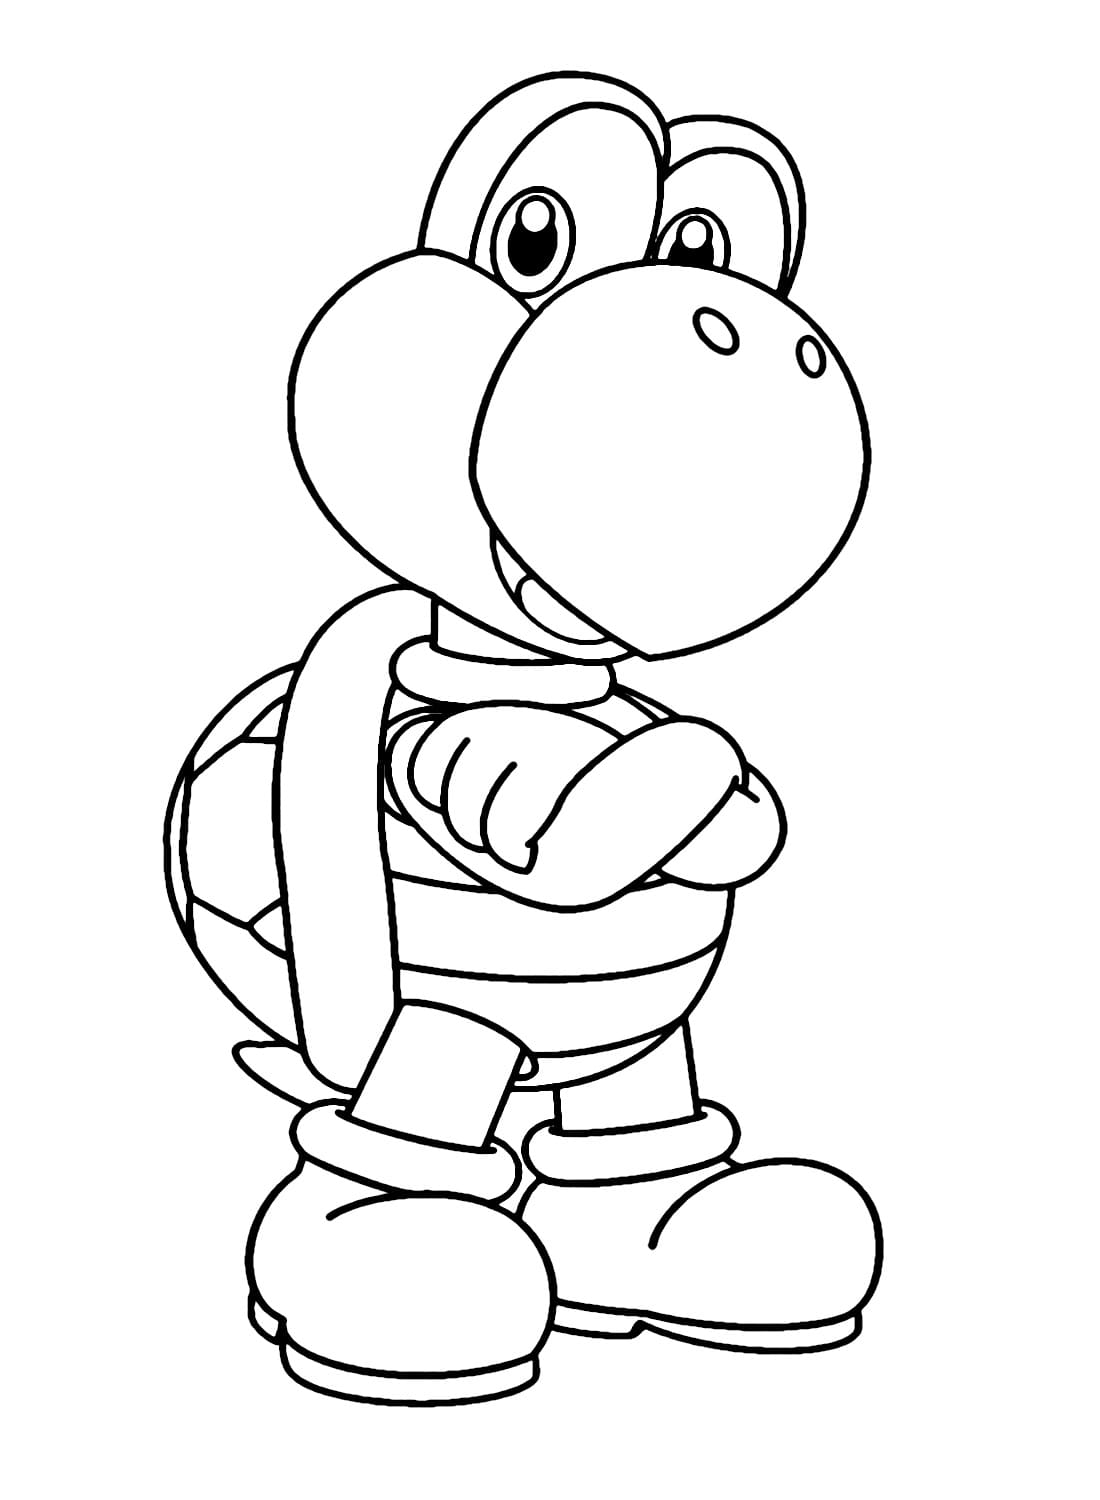 Koopa Troopa Heureux coloring page